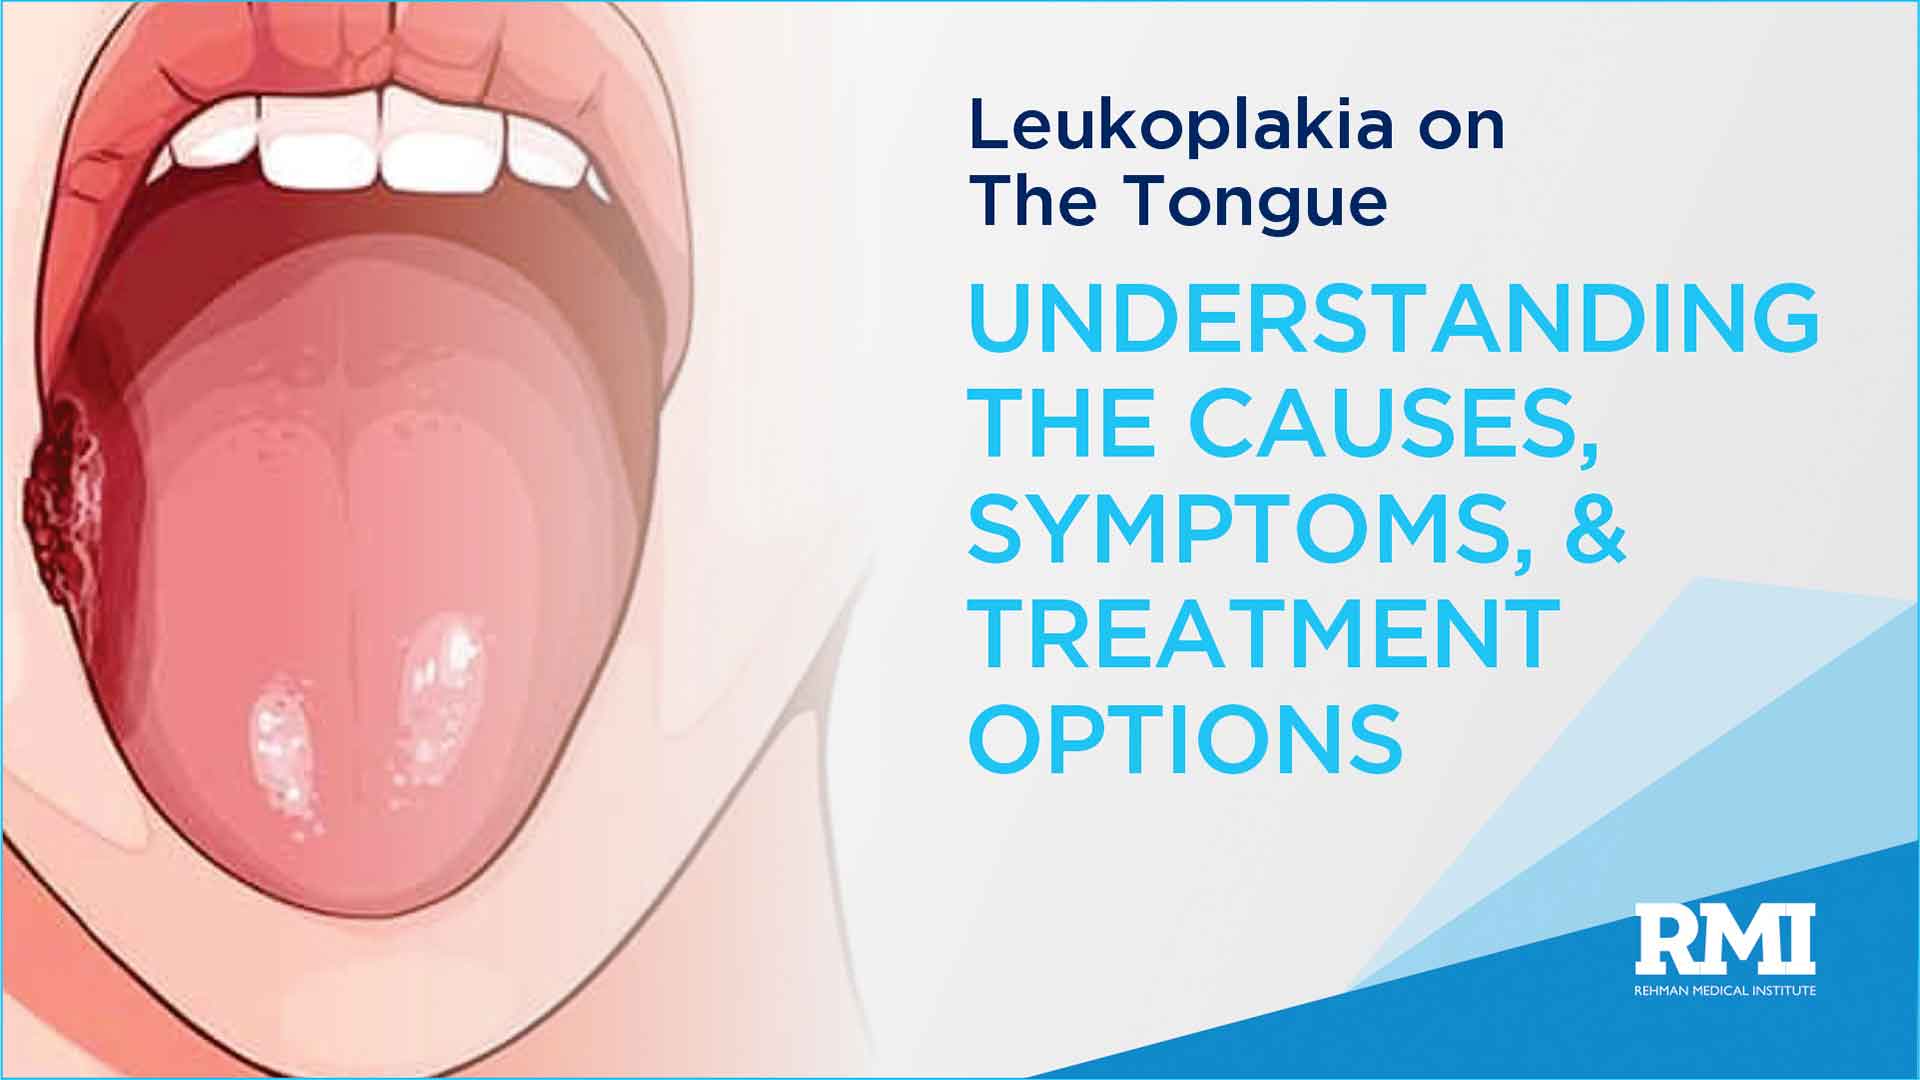 Leukoplakia on the Tongue: Understanding the Causes, Symptoms, and Treatment Options